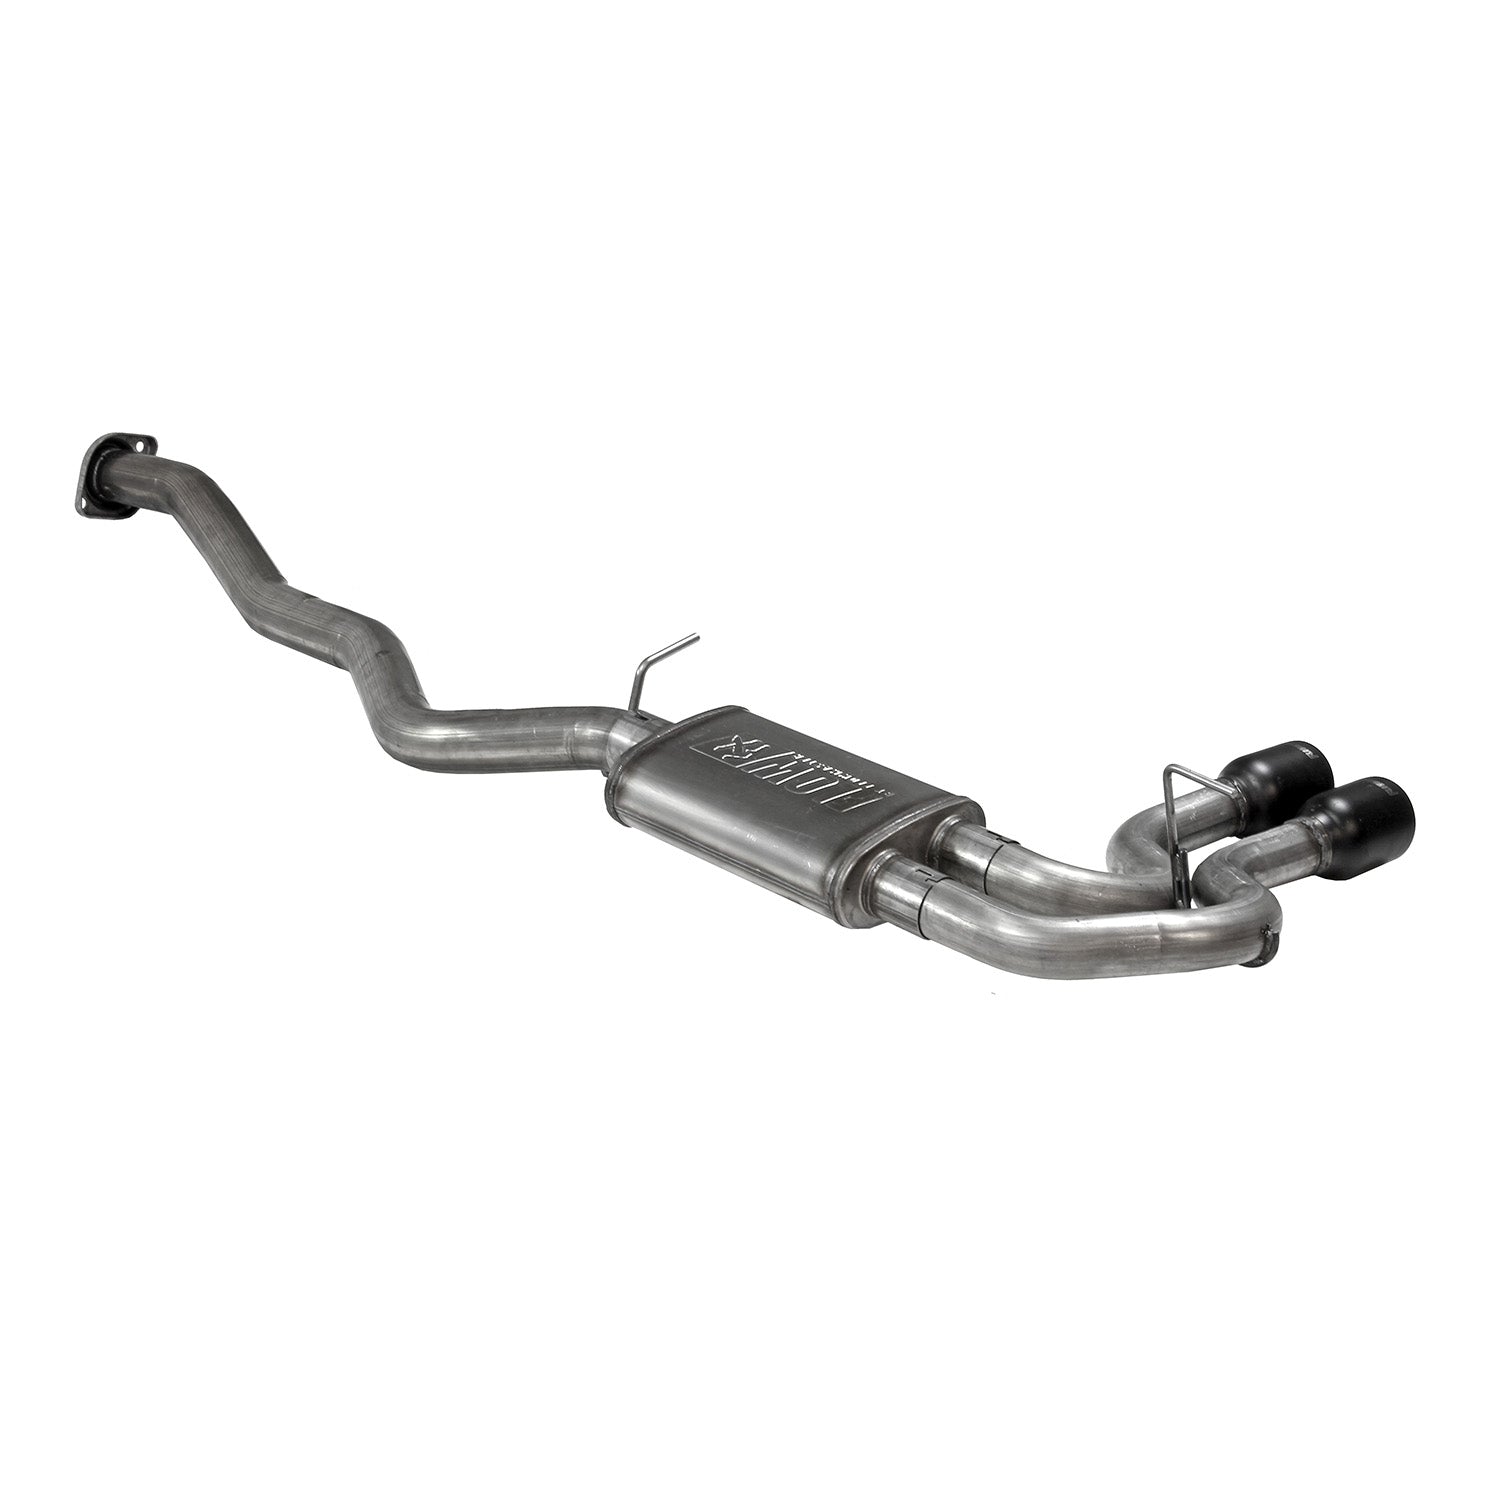 Flowmaster 717990 FlowFX Extreme Cat-Back Exhaust System